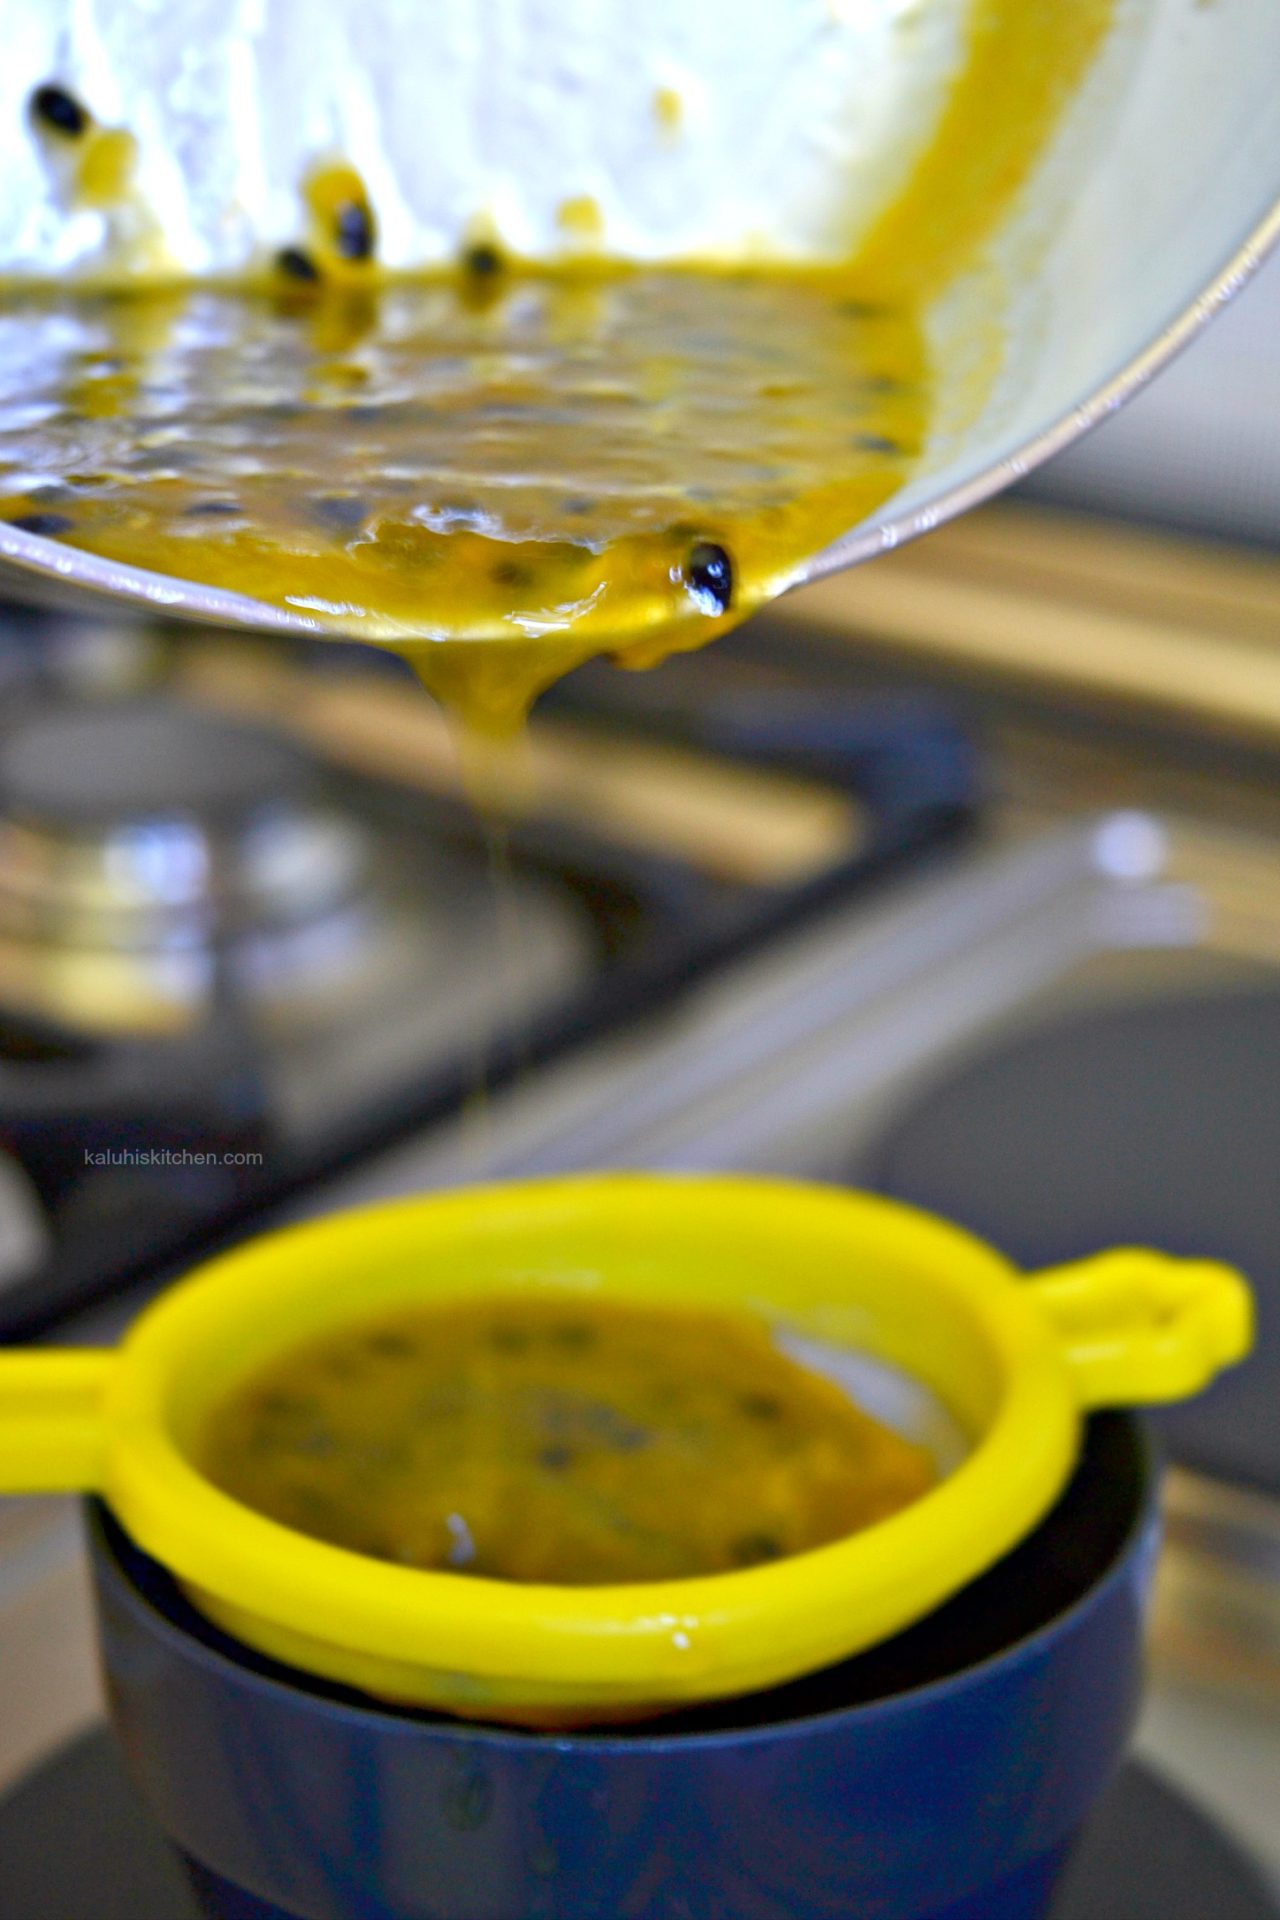 sieve your passion fruitsyrup and allow it to cool down to room temparature before adding it to your salad_mango mint salad_kaluhiskitchen.com